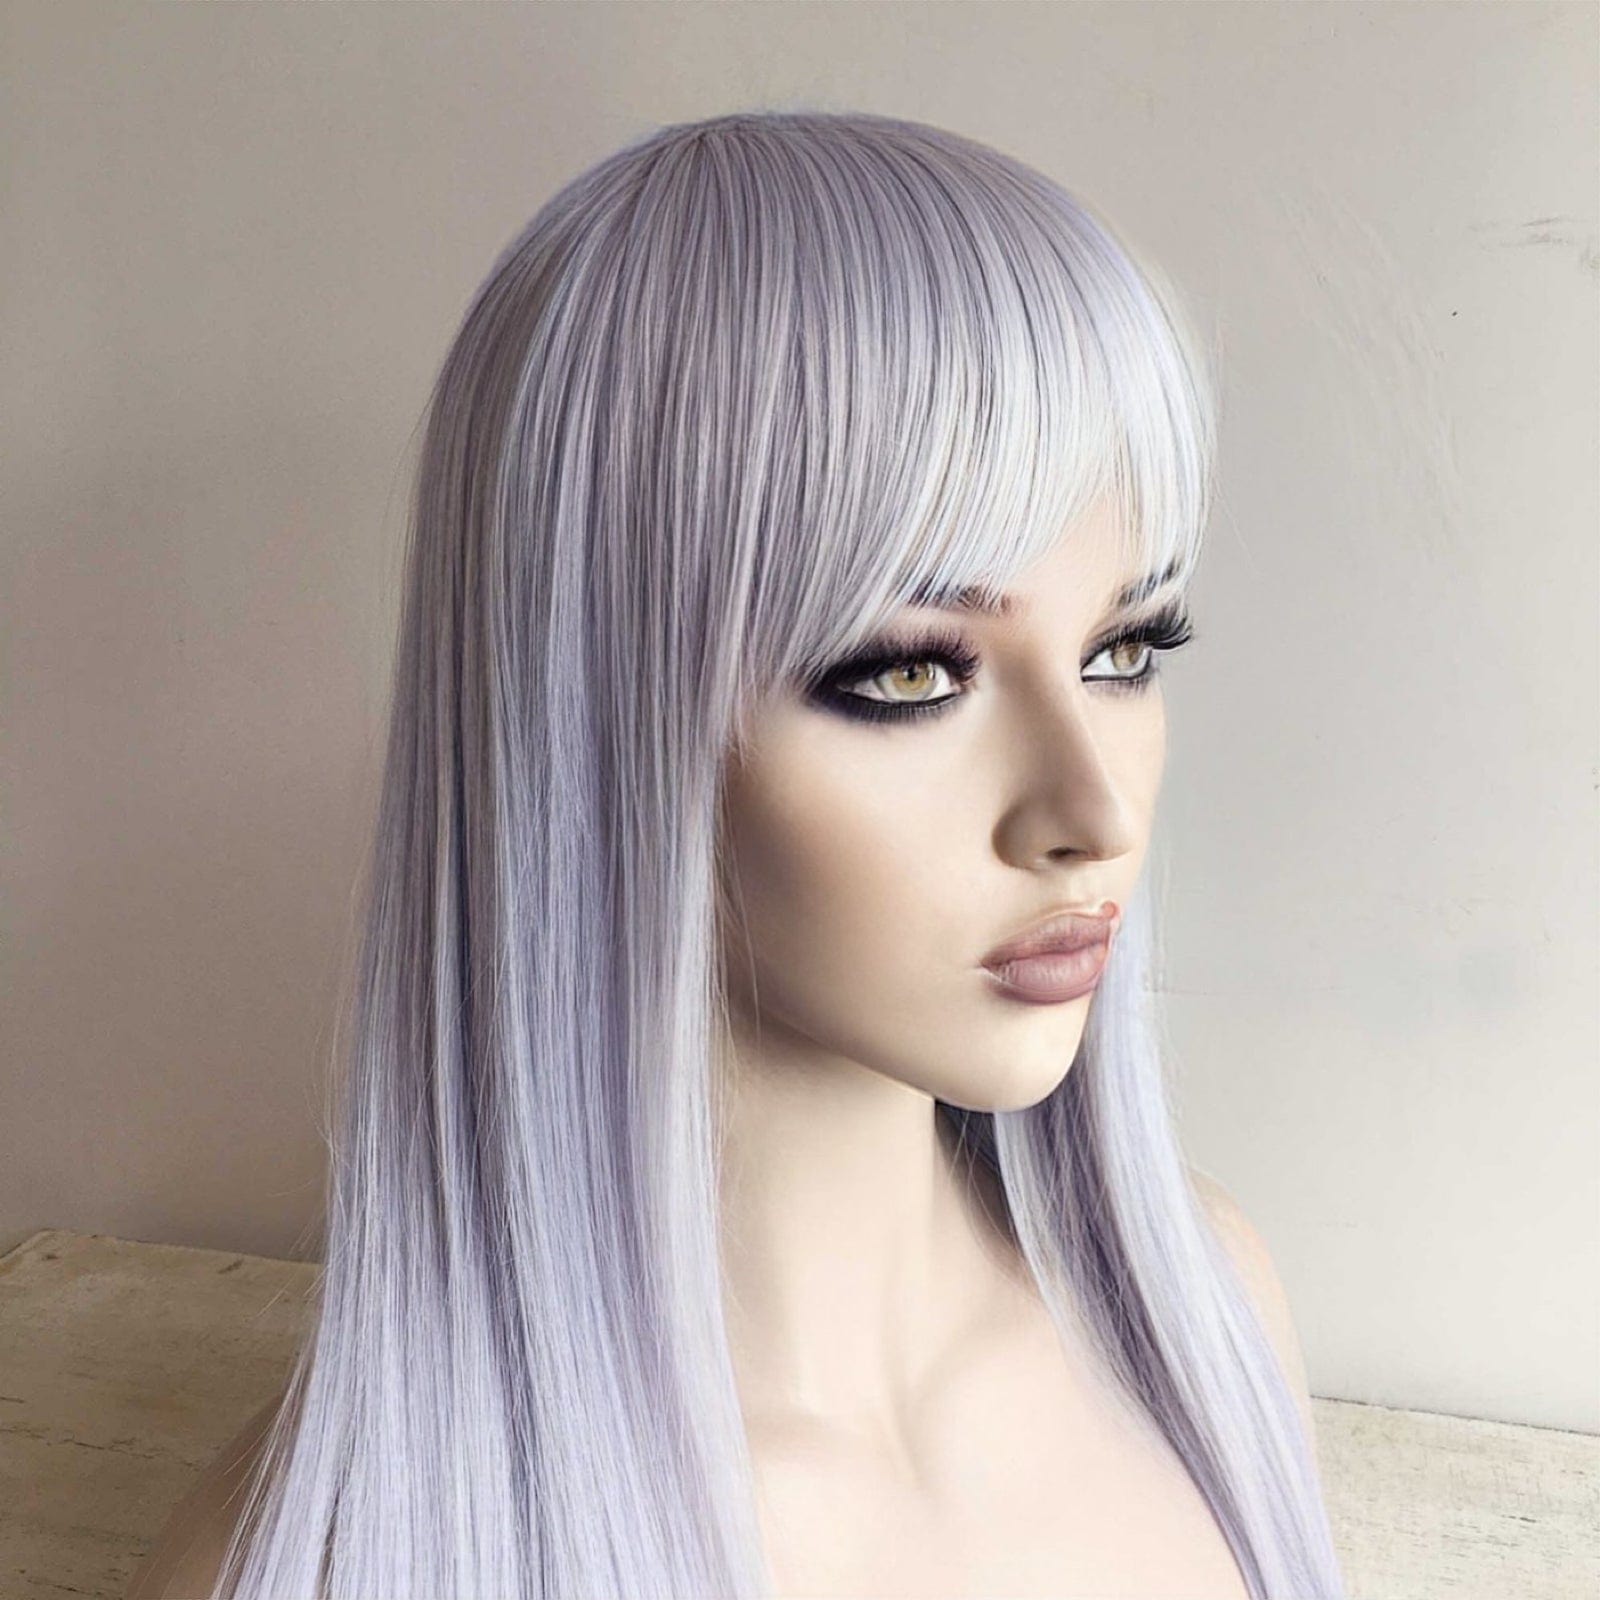 nevermindyrhead Women Light Lavender Purple And Blue Ombre Long Straight Fringe Bangs Wig